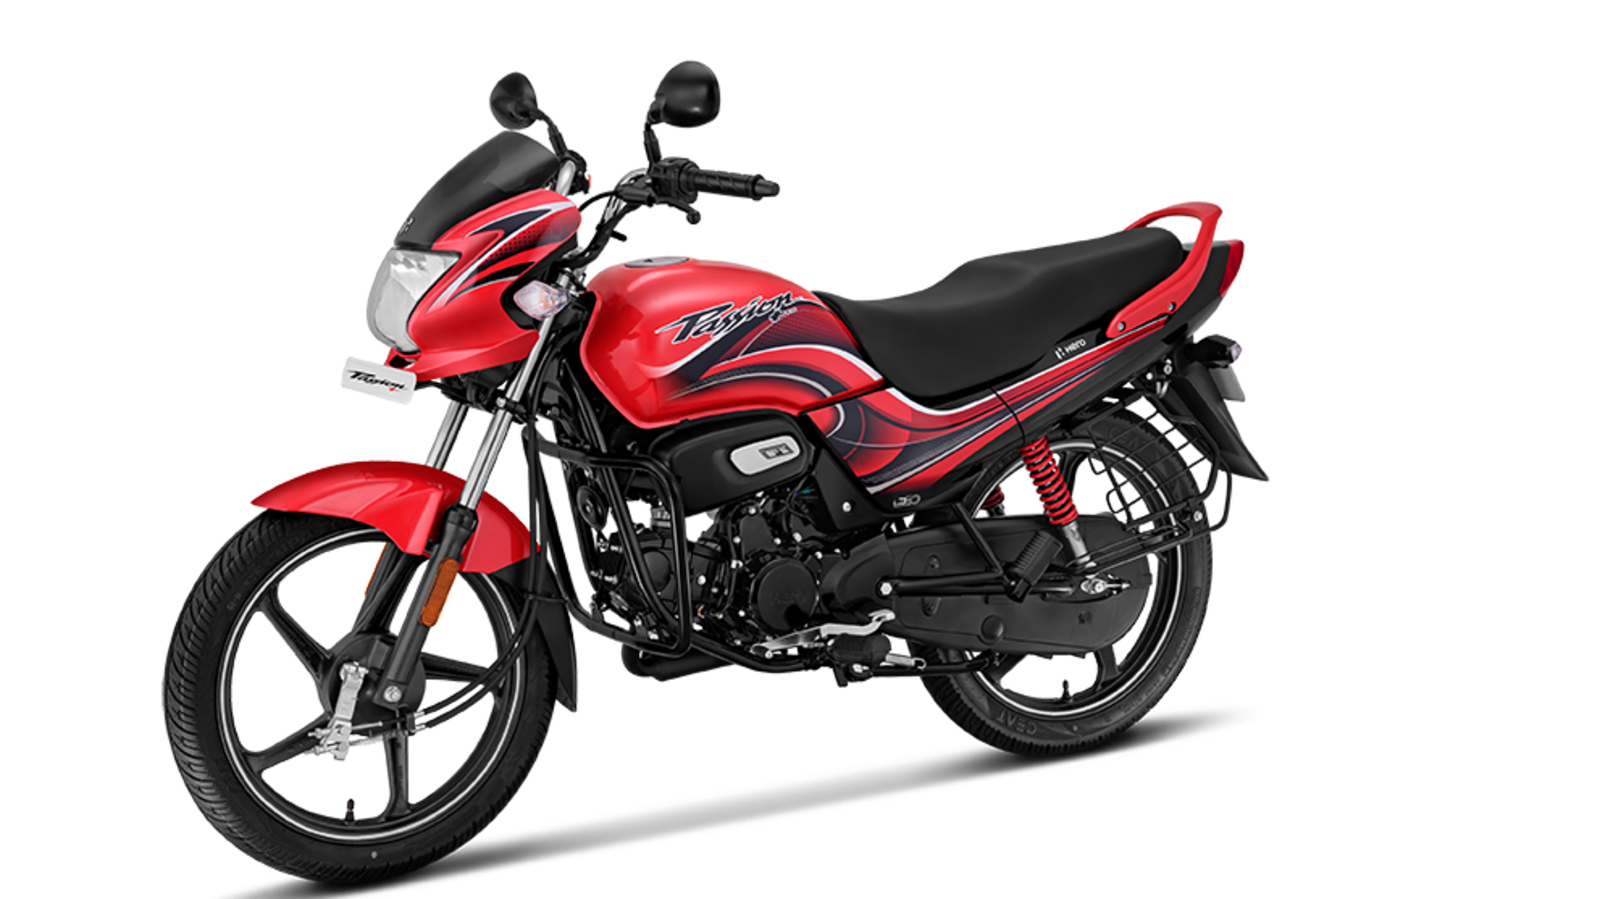 Hero Passion Plus launched at ₹76,301, gets new features HT Auto